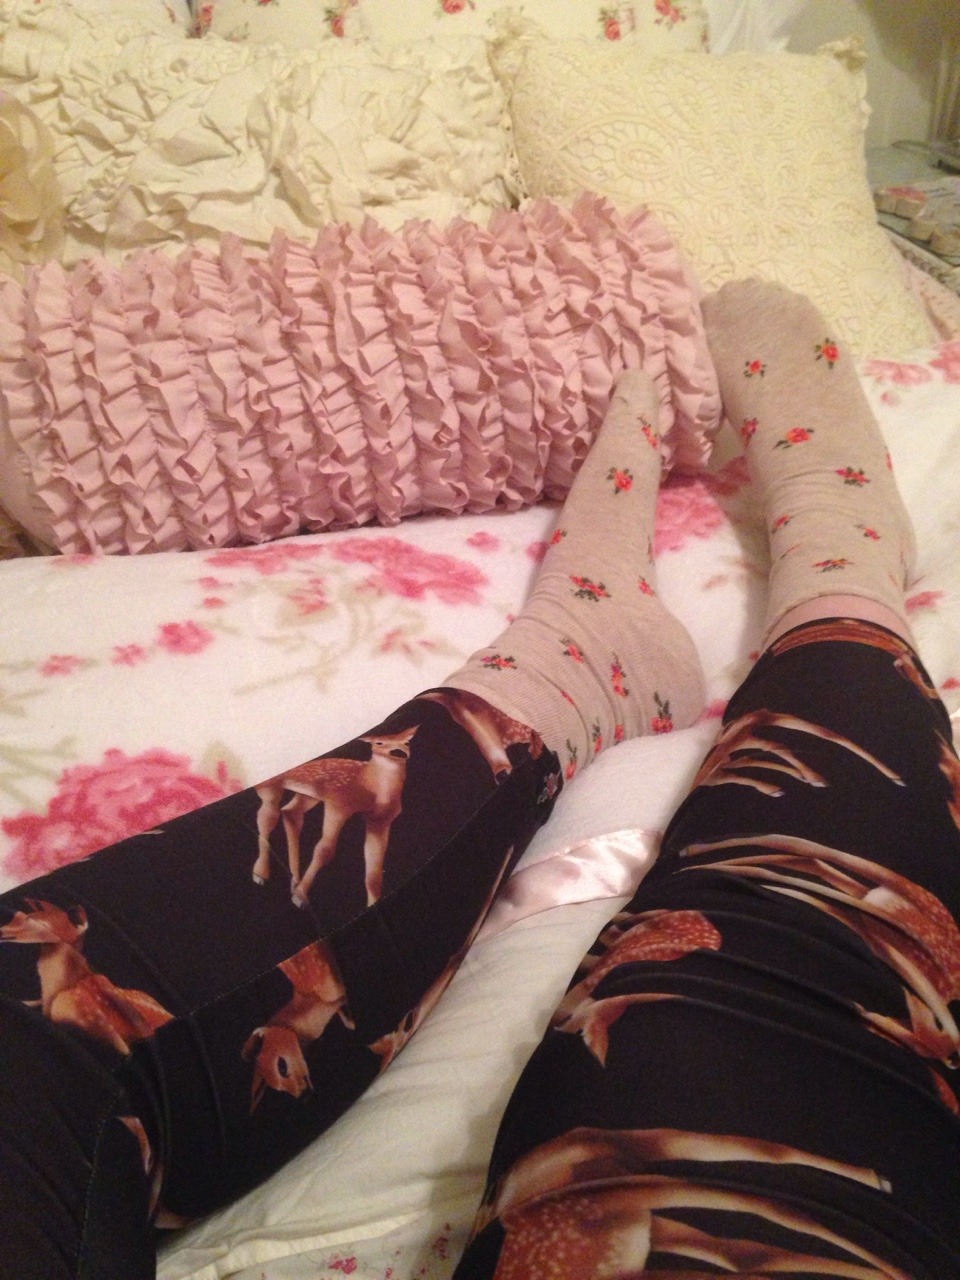 chubby-bunnies:  3X Leggings from Modcloth because Plus Size leggings are hard to